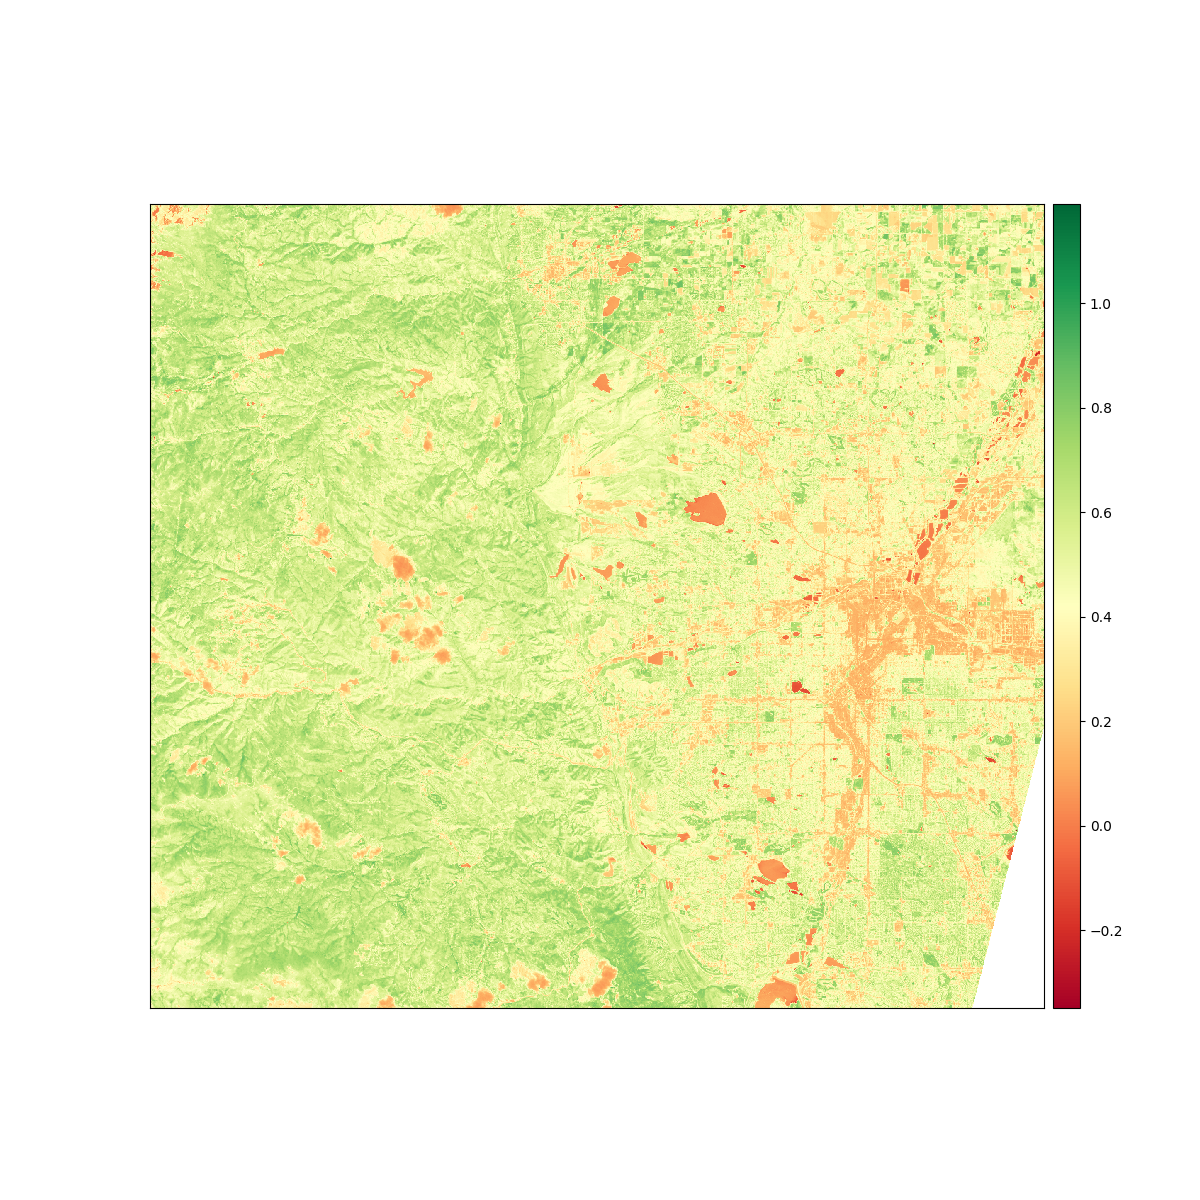 ../_images/sphx_glr_plot_bands_functionality_003.png